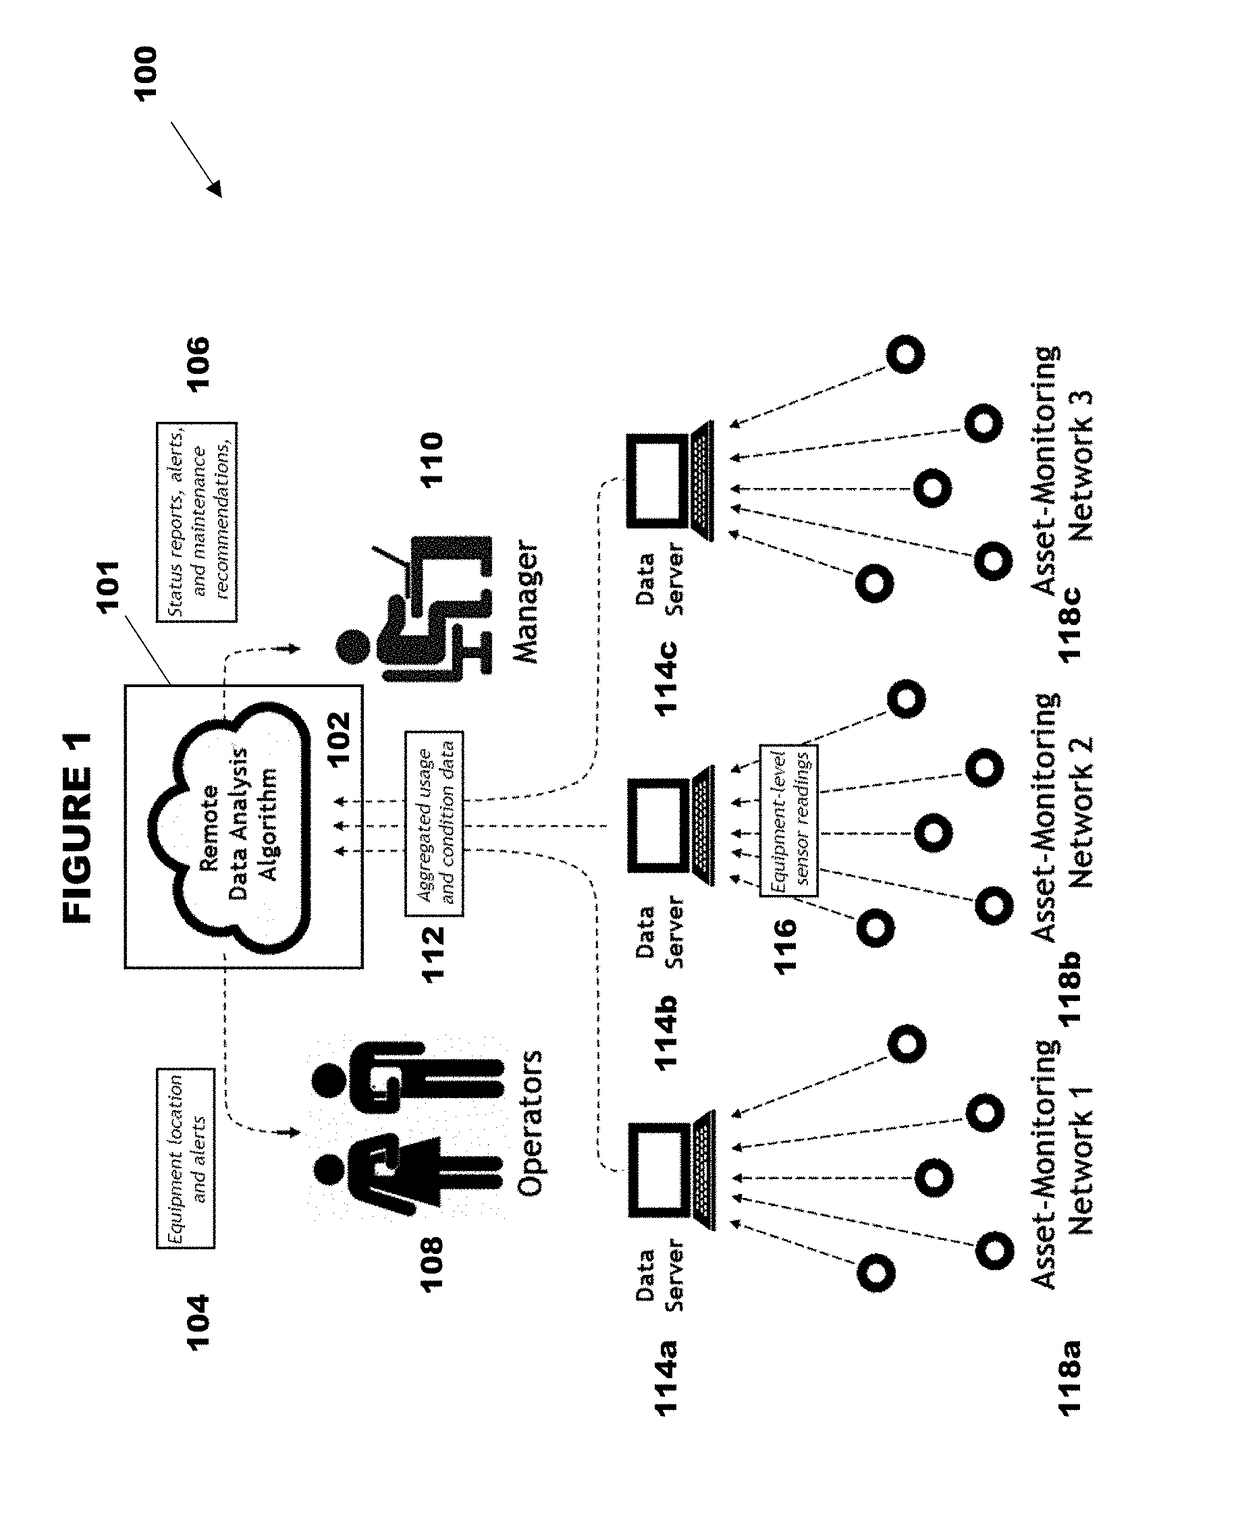 System and method for asset-agnostic wireless monitoring and predictive maintenance of deployed assets